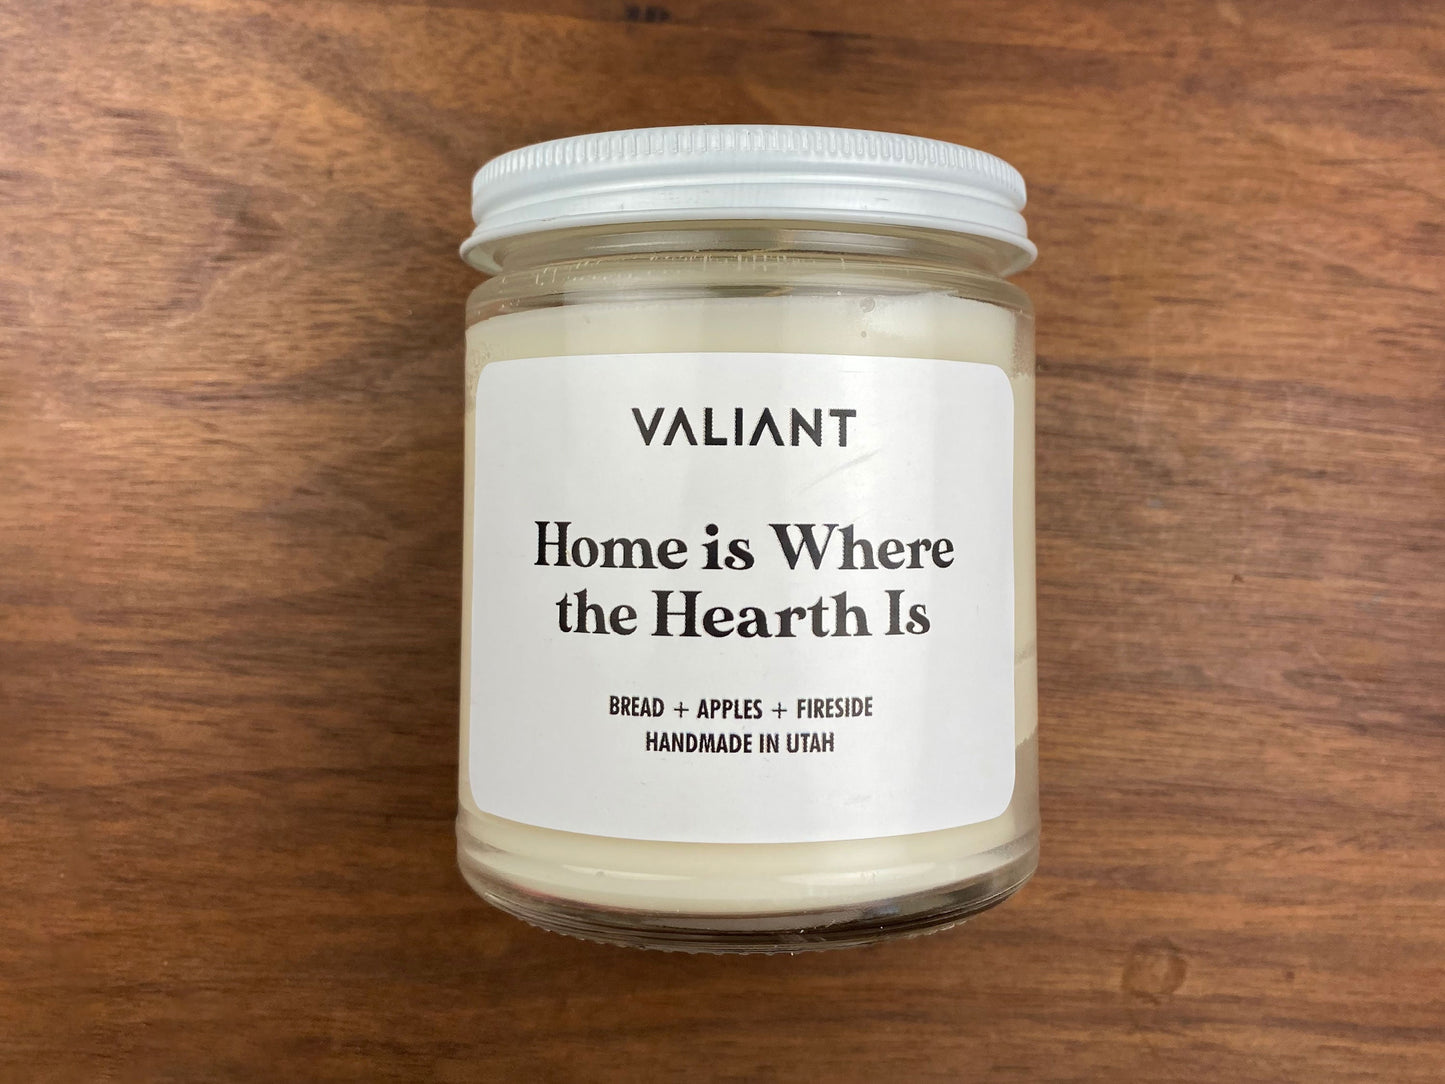 Home is Where the Hearth Is Candle